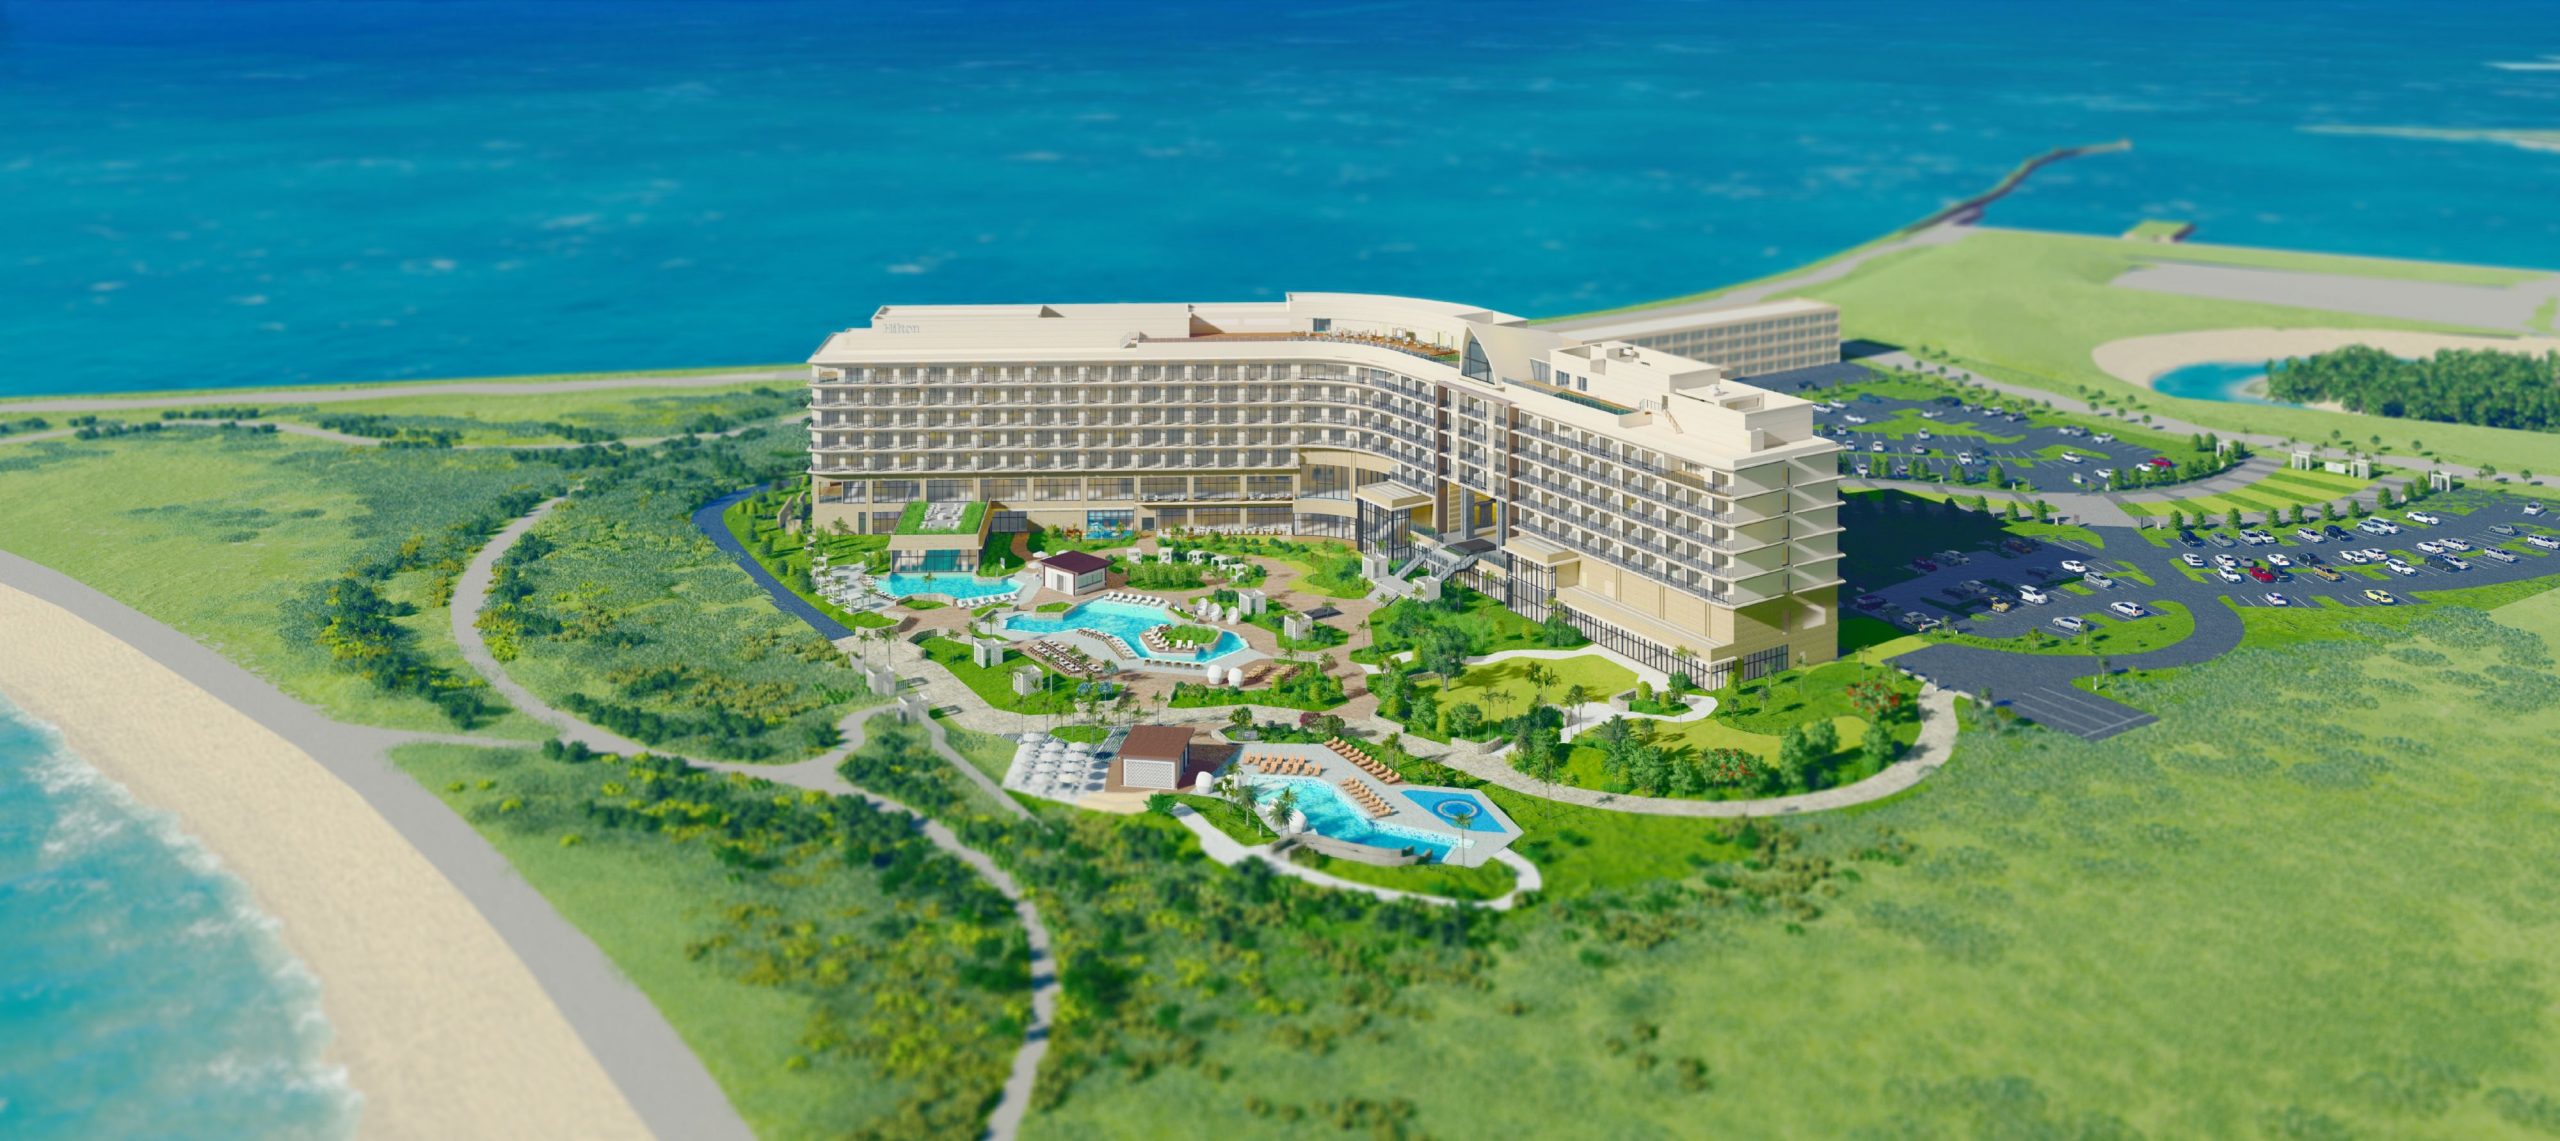 Where to stay in Okinawa Hilton Hotel